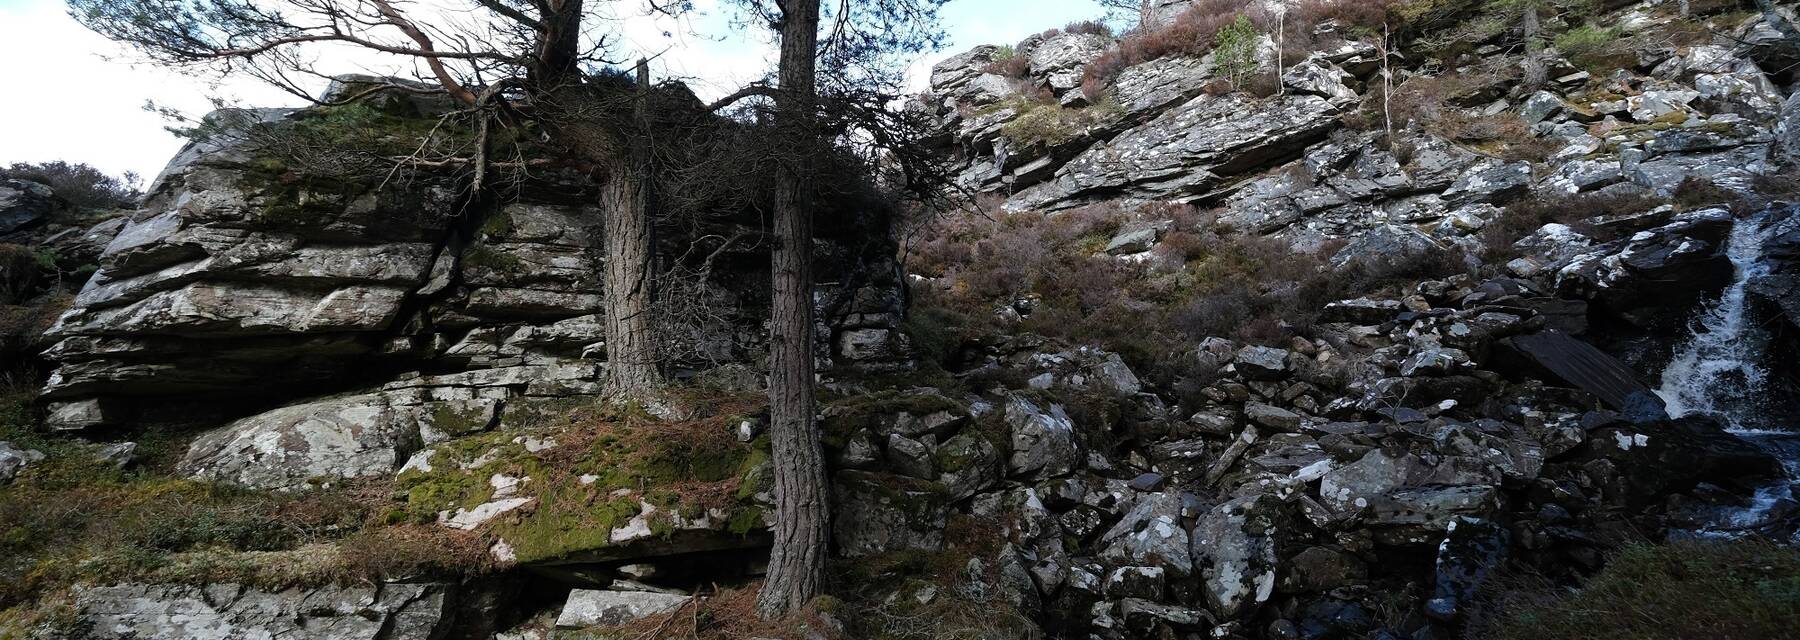 A whisky still at Creag Padraig, hidden amongst a rocky crag. Trees grow out of the rockface.